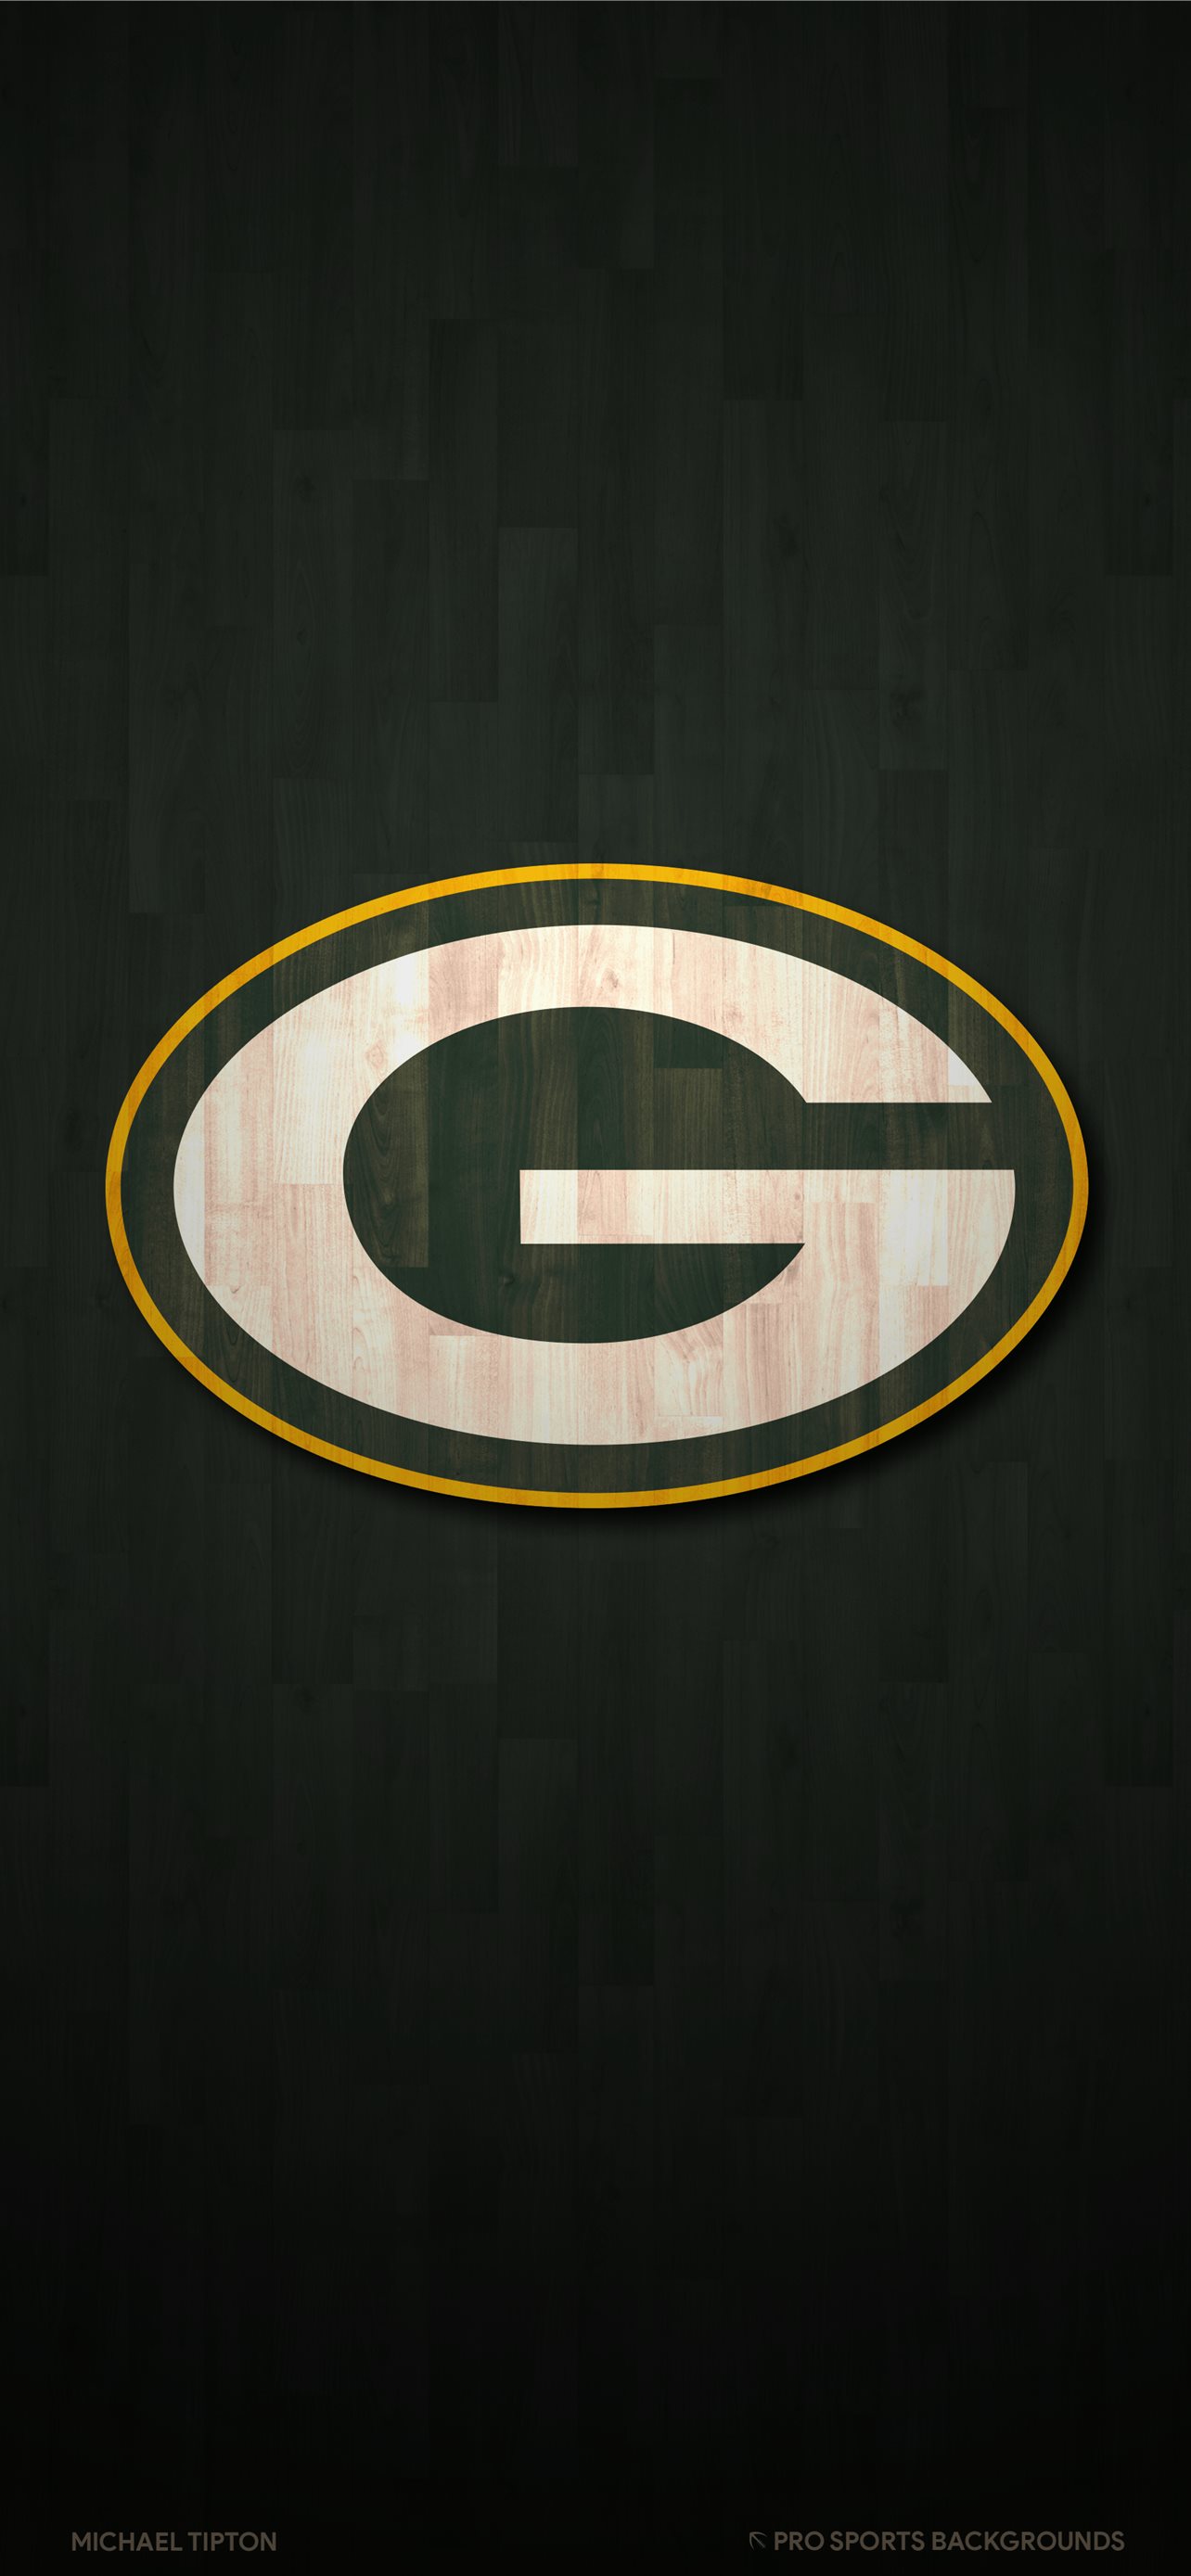 Made a movie posterlikeshrineepic Packers wallpaper for my desktop  Sharing is caring Hopefully you like it HD Wallpaper  rGreenBayPackers